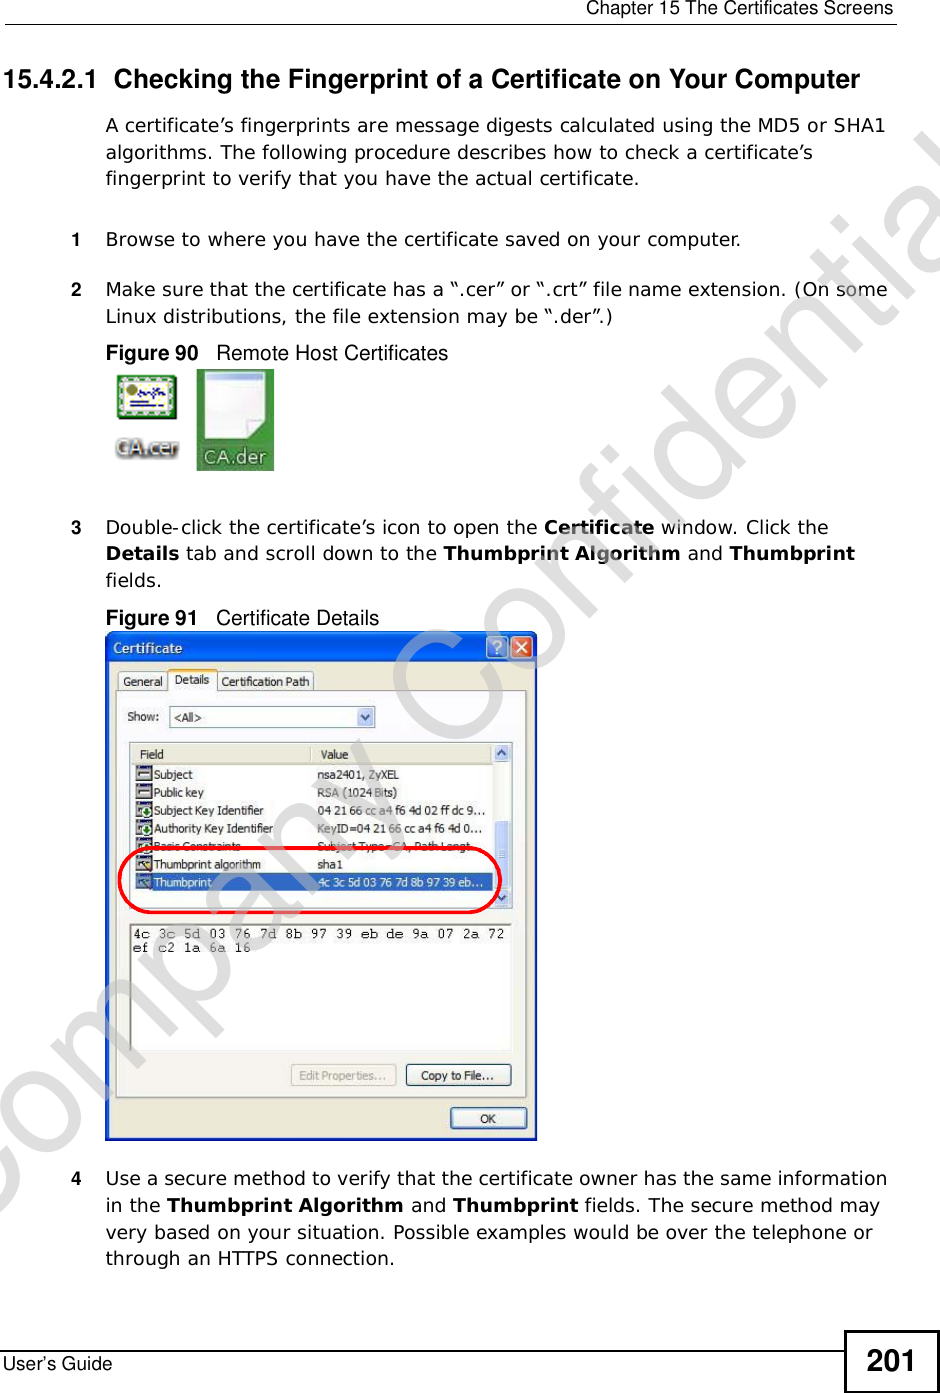  Chapter 15The Certificates ScreensUser’s Guide 20115.4.2.1  Checking the Fingerprint of a Certificate on Your ComputerA certificate’s fingerprints are message digests calculated using the MD5 or SHA1 algorithms. The following procedure describes how to check a certificate’s fingerprint to verify that you have the actual certificate. 1Browse to where you have the certificate saved on your computer. 2Make sure that the certificate has a “.cer” or “.crt” file name extension. (On some Linux distributions, the file extension may be “.der”.)Figure 90   Remote Host Certificates3Double-click the certificate’s icon to open the Certificate window. Click the Details tab and scroll down to the Thumbprint Algorithm and Thumbprintfields.Figure 91   Certificate Details 4Use a secure method to verify that the certificate owner has the same information in the Thumbprint Algorithm and Thumbprint fields. The secure method may very based on your situation. Possible examples would be over the telephone or through an HTTPS connection. Company Confidential